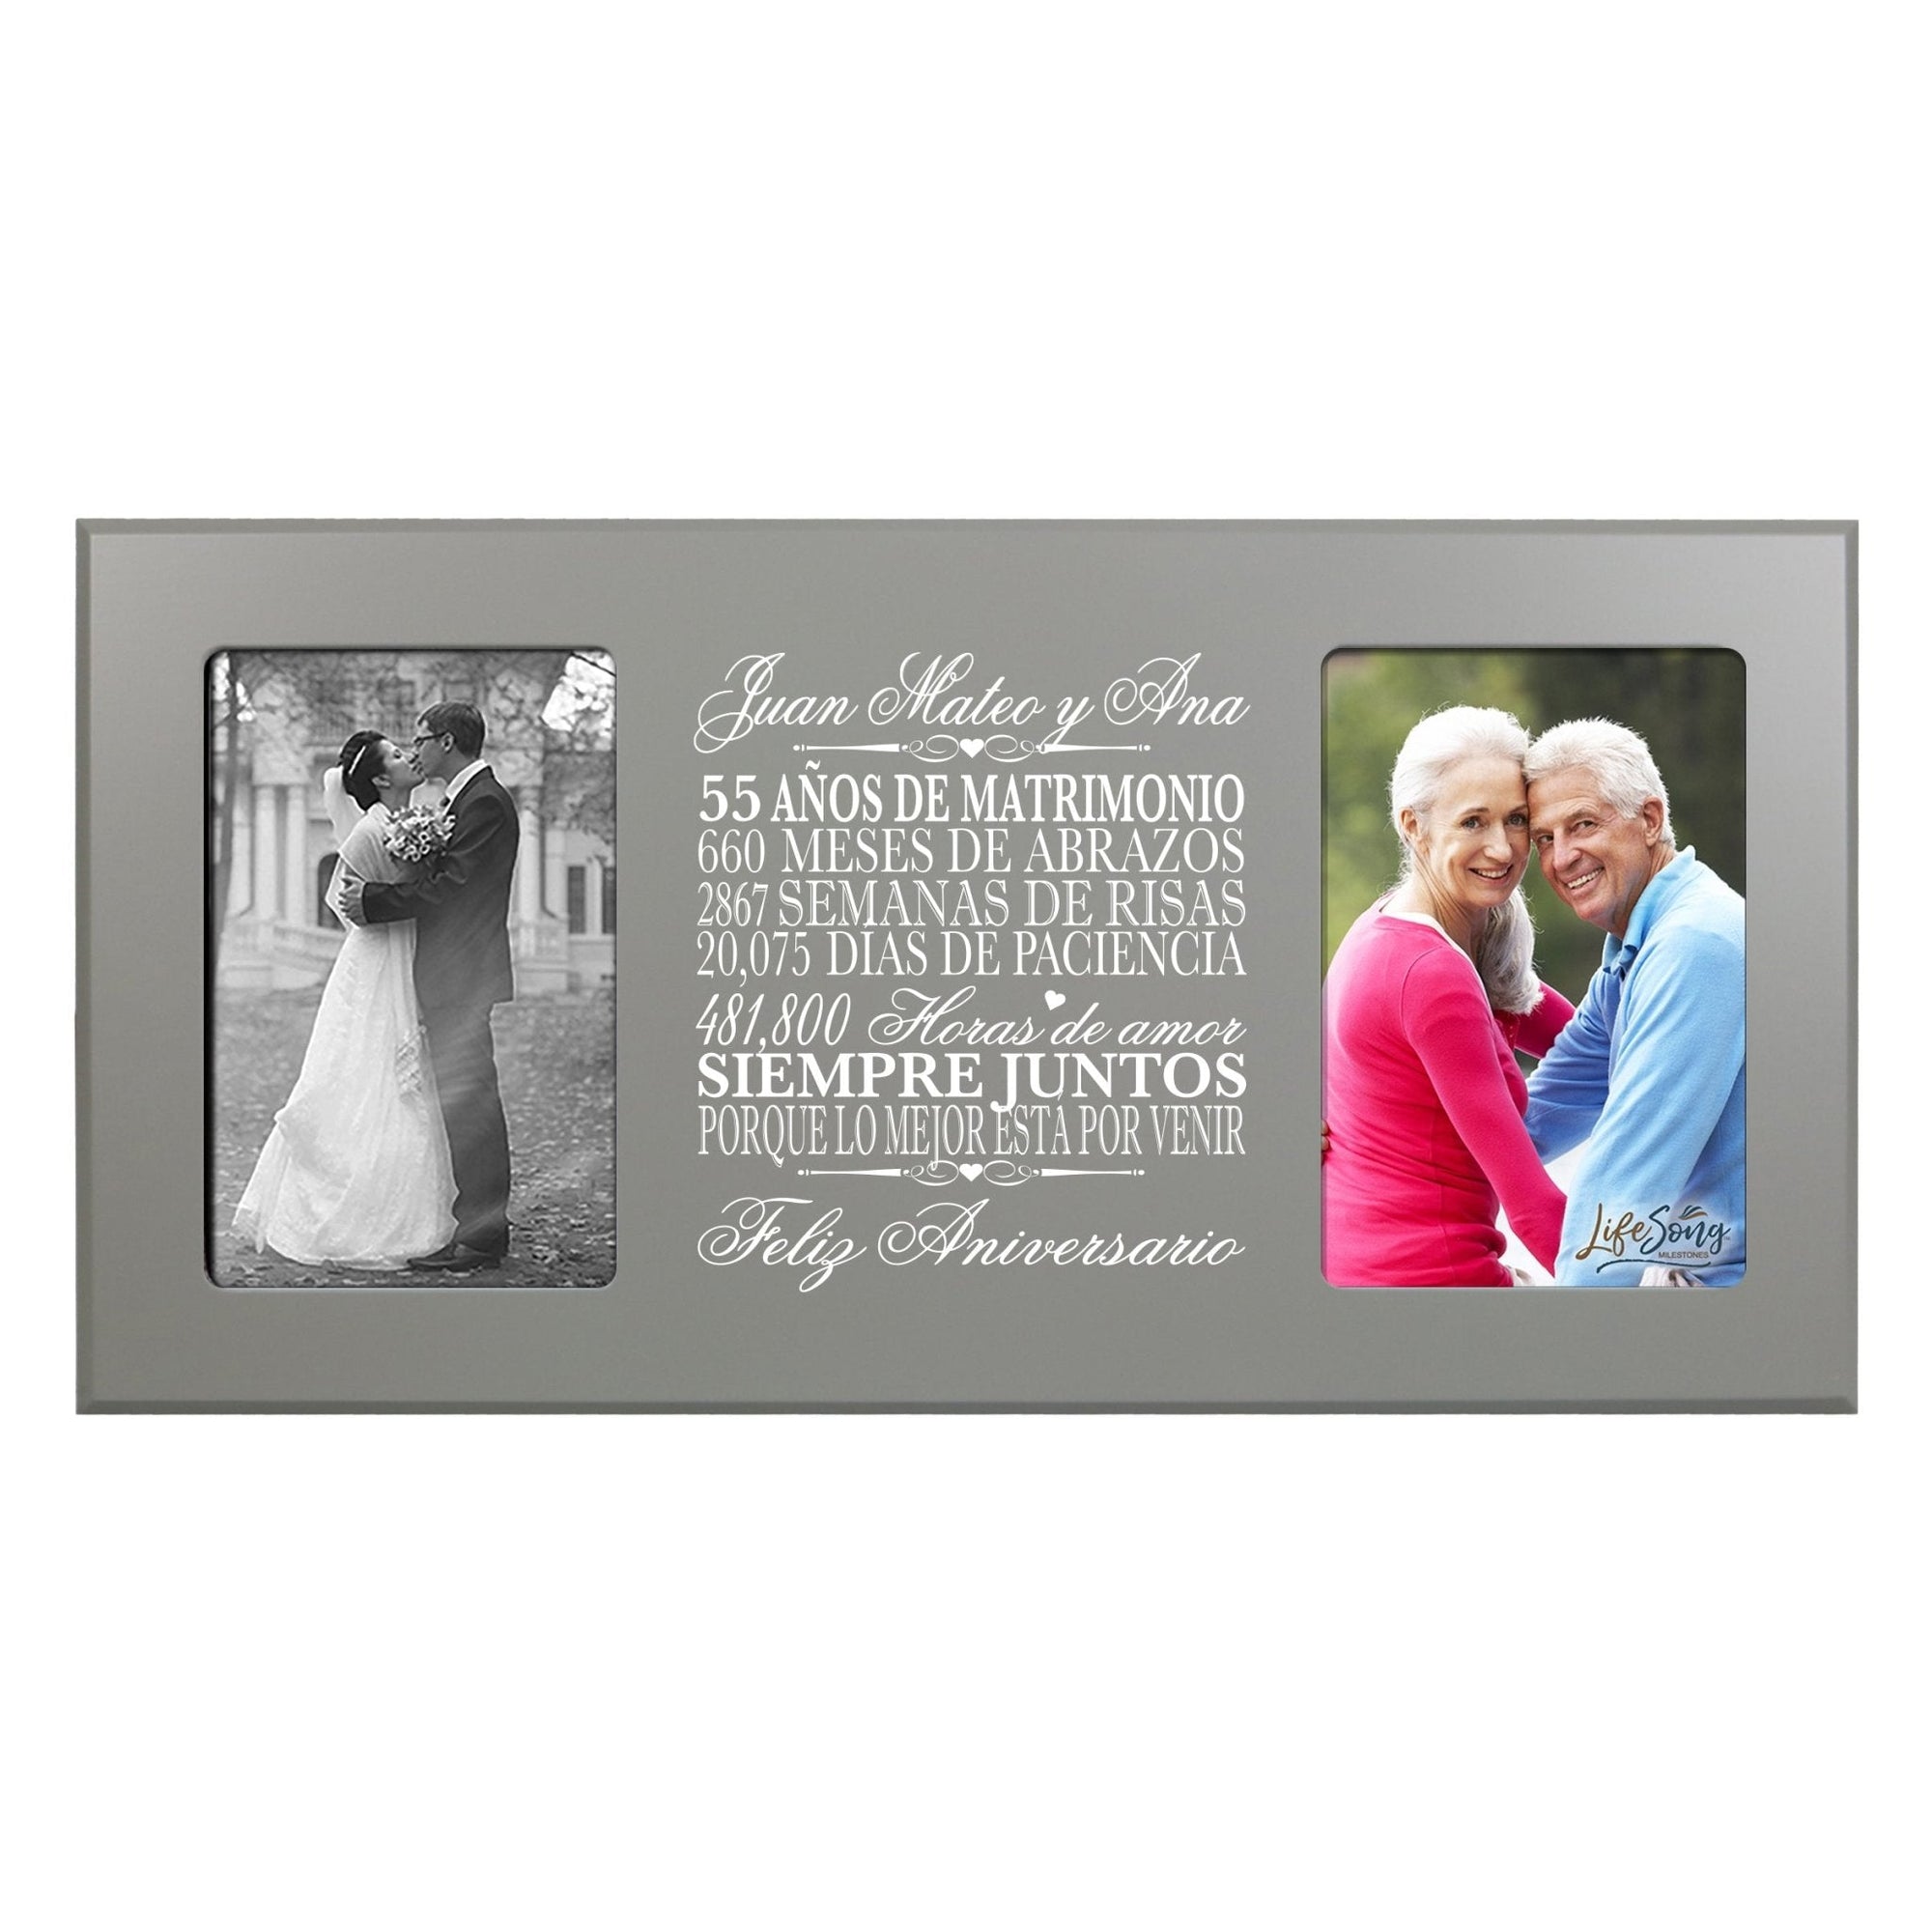 Lifesong Milestones Personalized 55th Wedding Anniversary Spanish Picture Frame